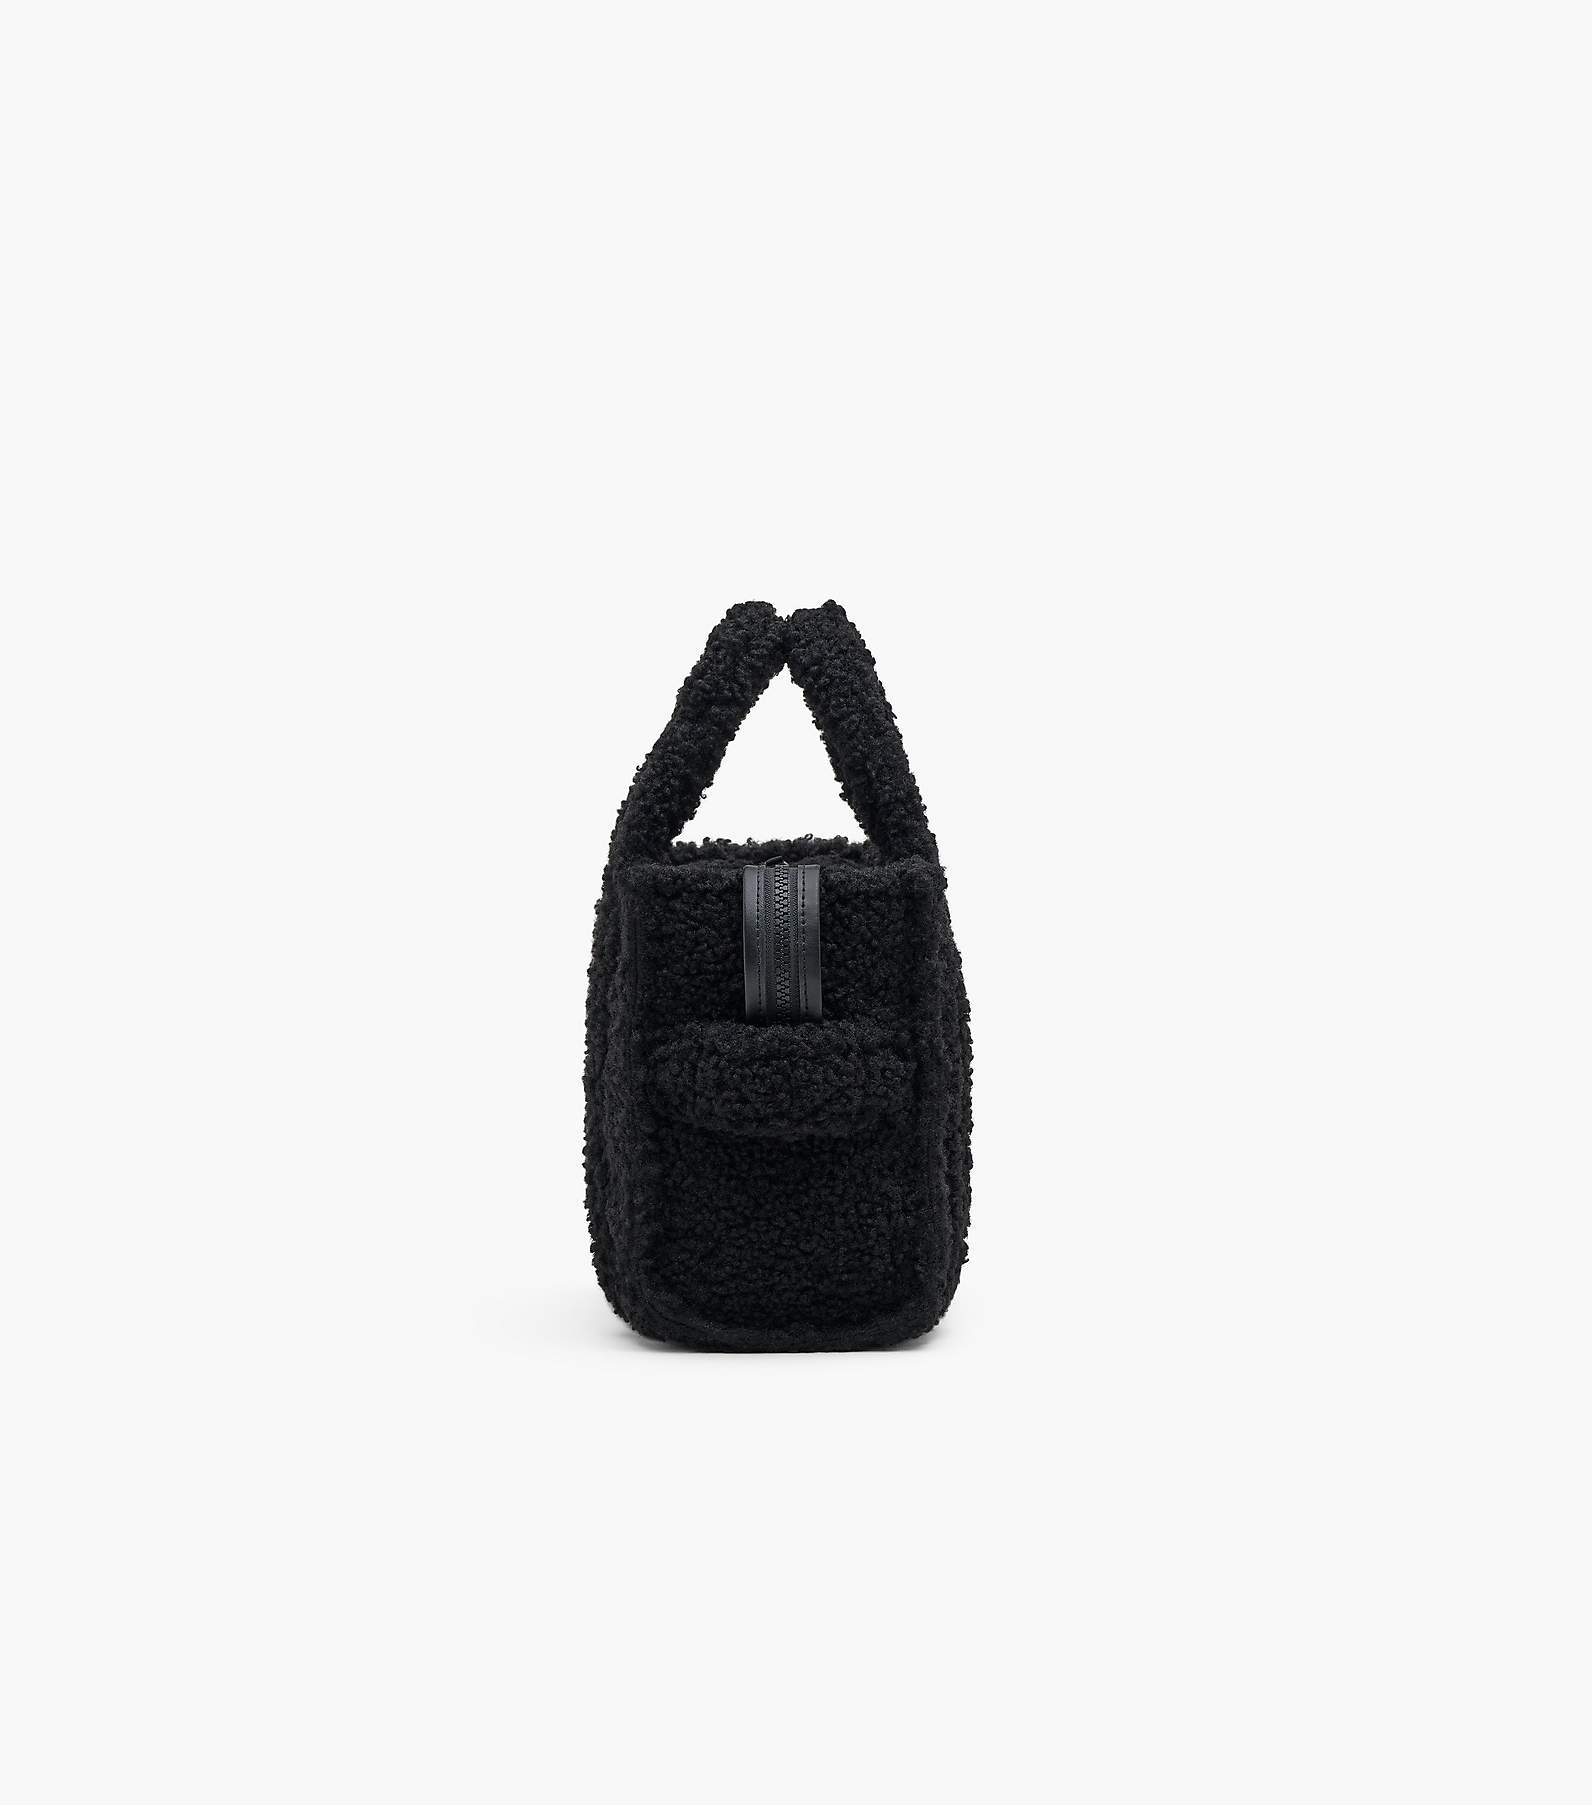 Marc Jacobs] THE TEDDY SMALL TRAVELER TOTE BAG M0016740 FLUFFY